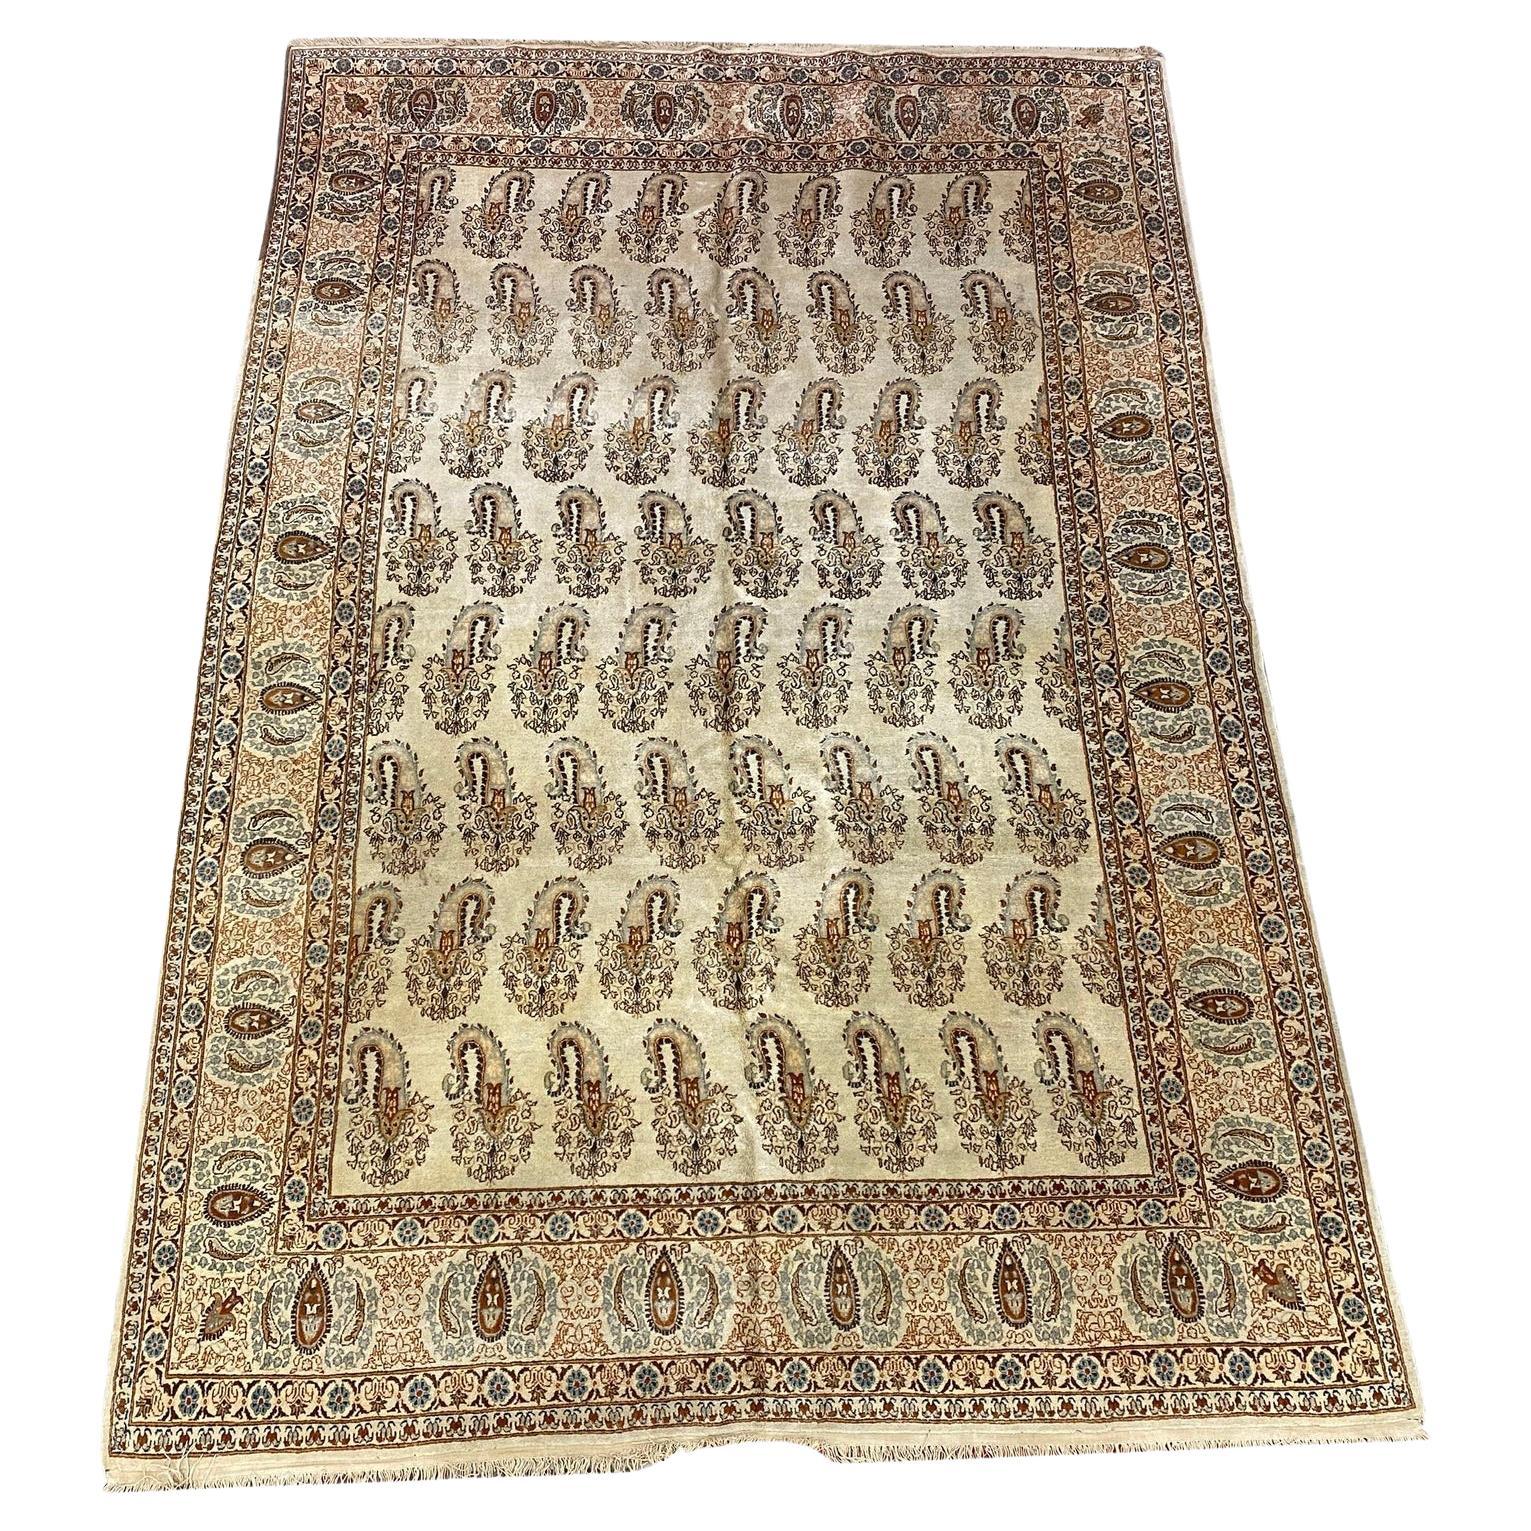 Very Unique and old Persian Kashan - 11'-2" x 7'-7" For Sale